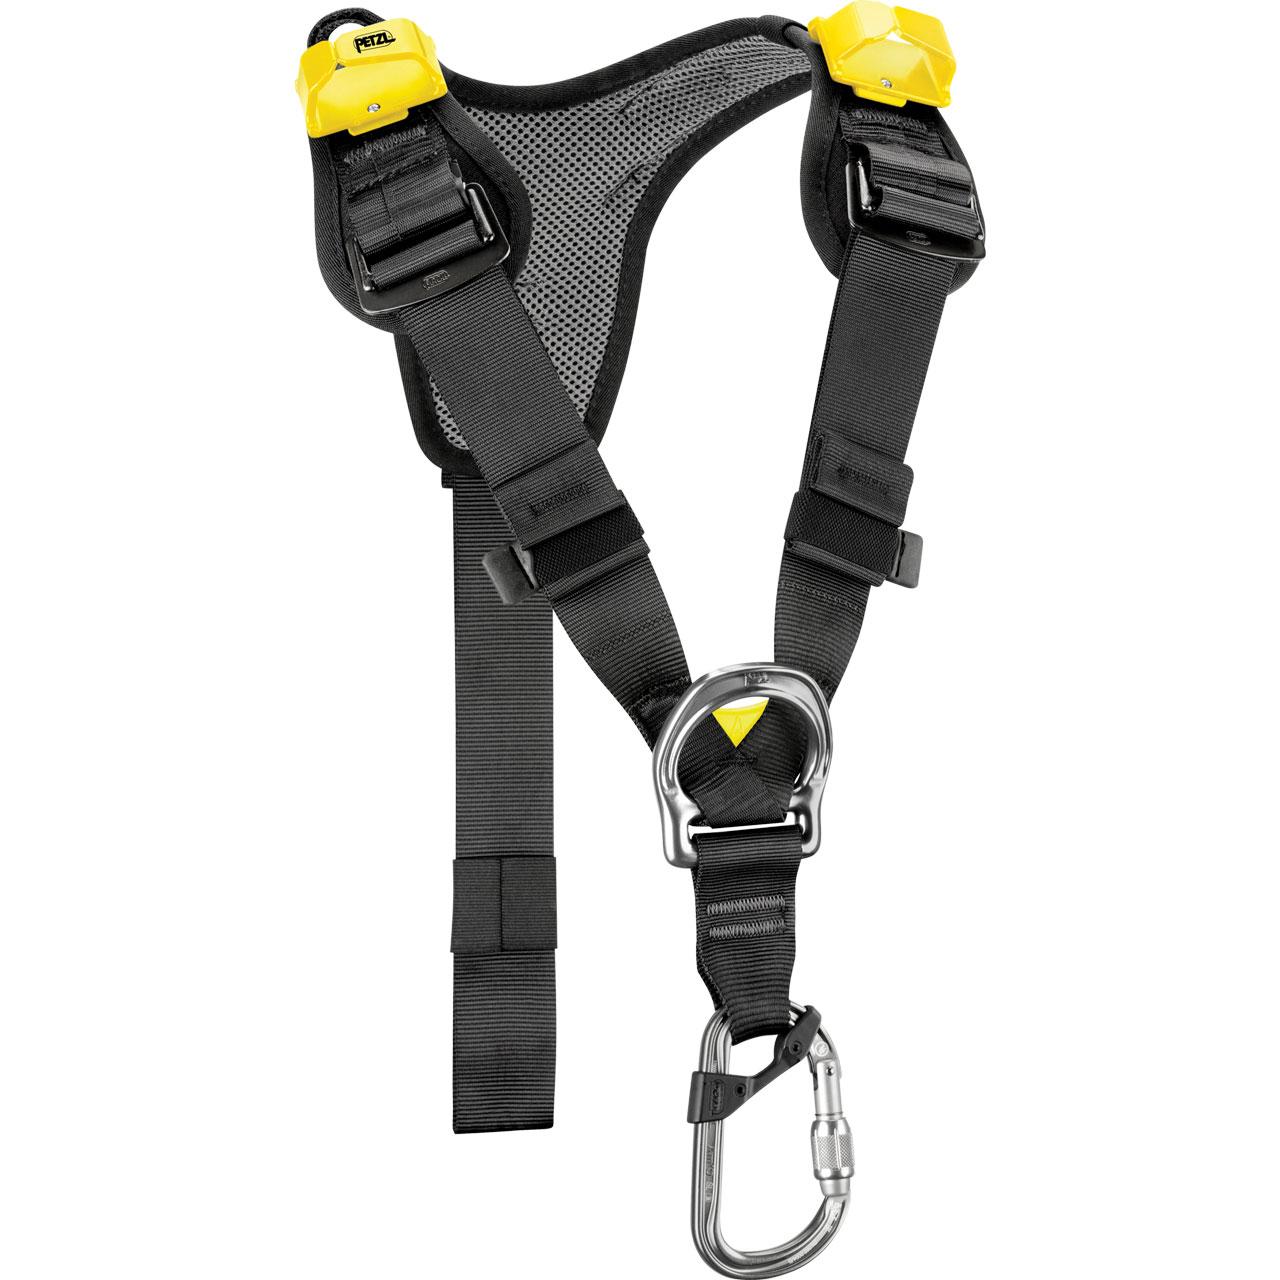 Top Harness by Petzl